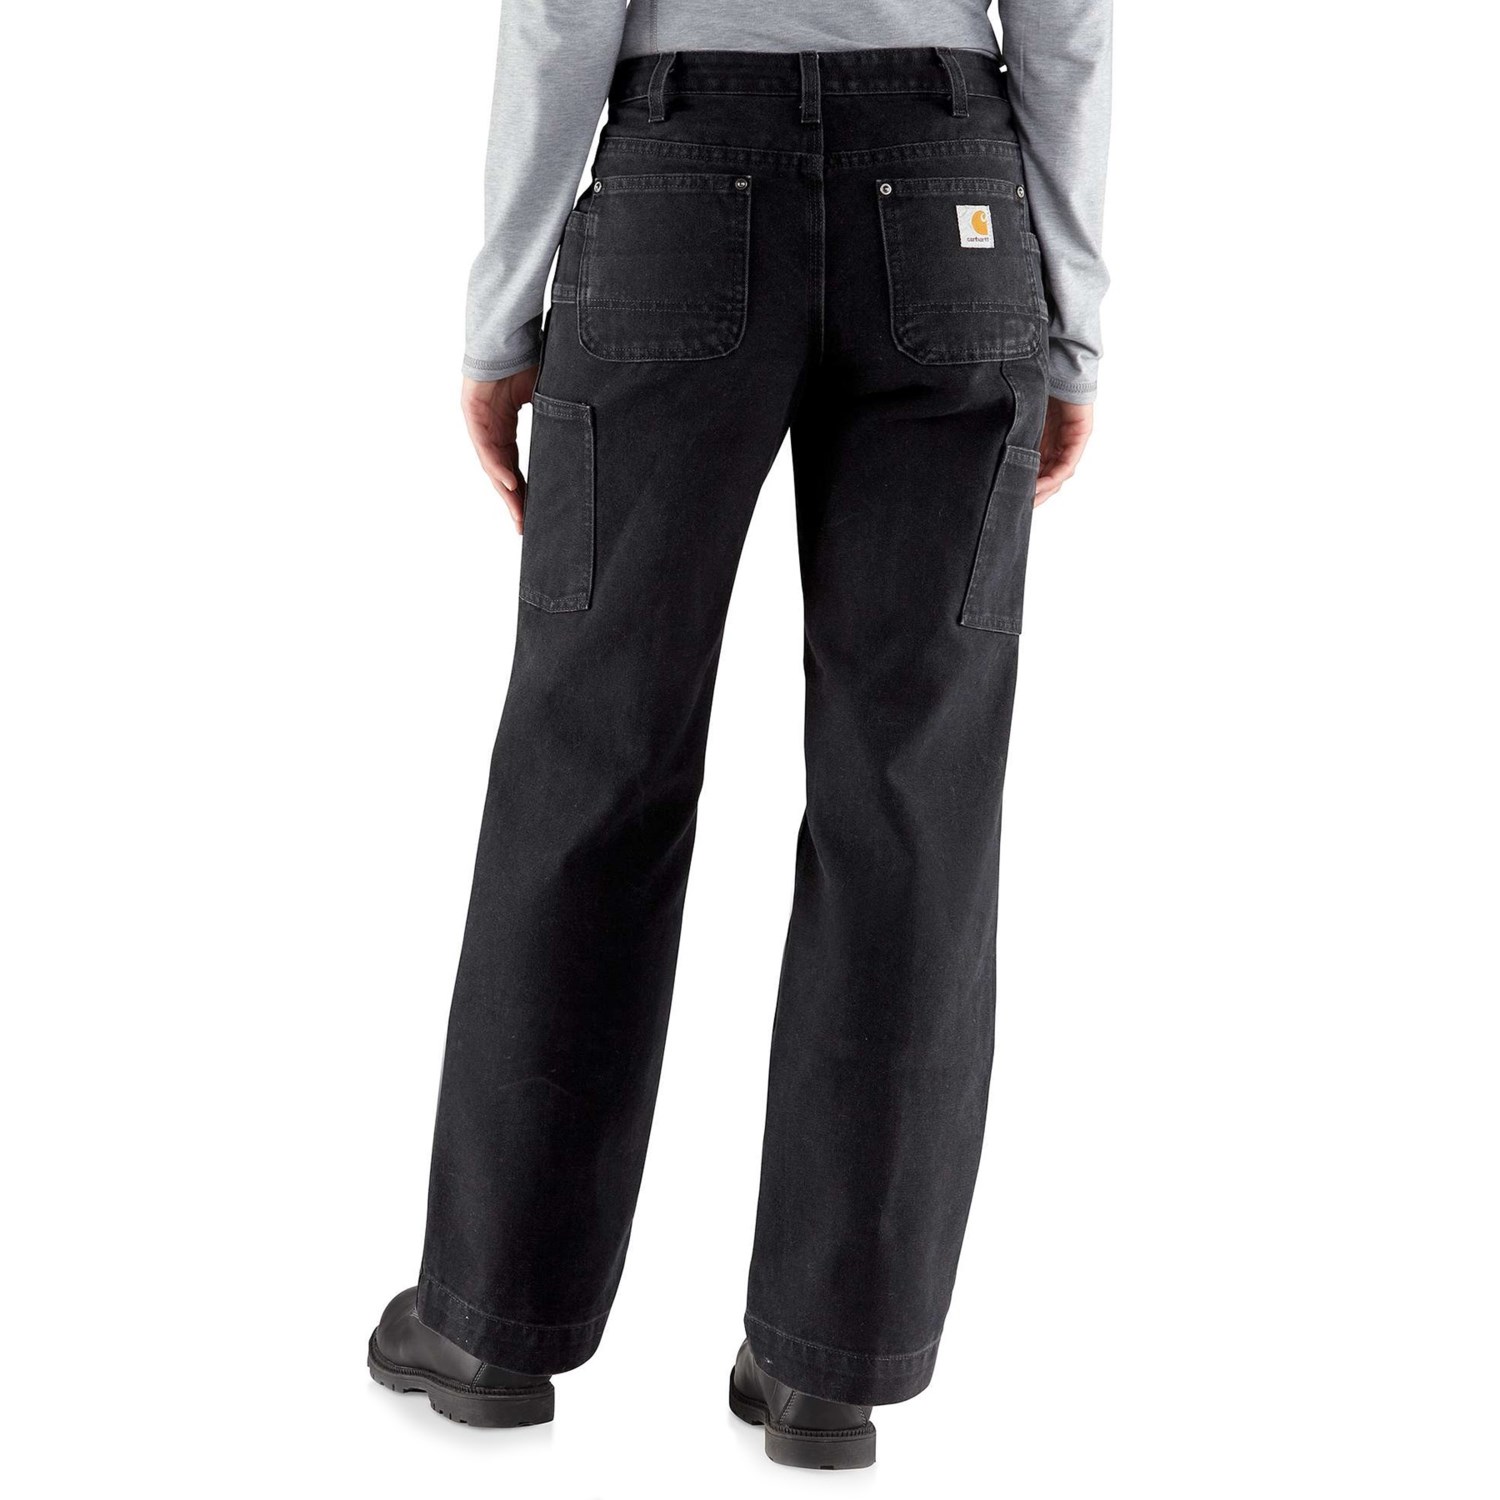 Carhartt 100681 Kane Double-Front Sandstone Duck Dungaree Jeans (For Women)